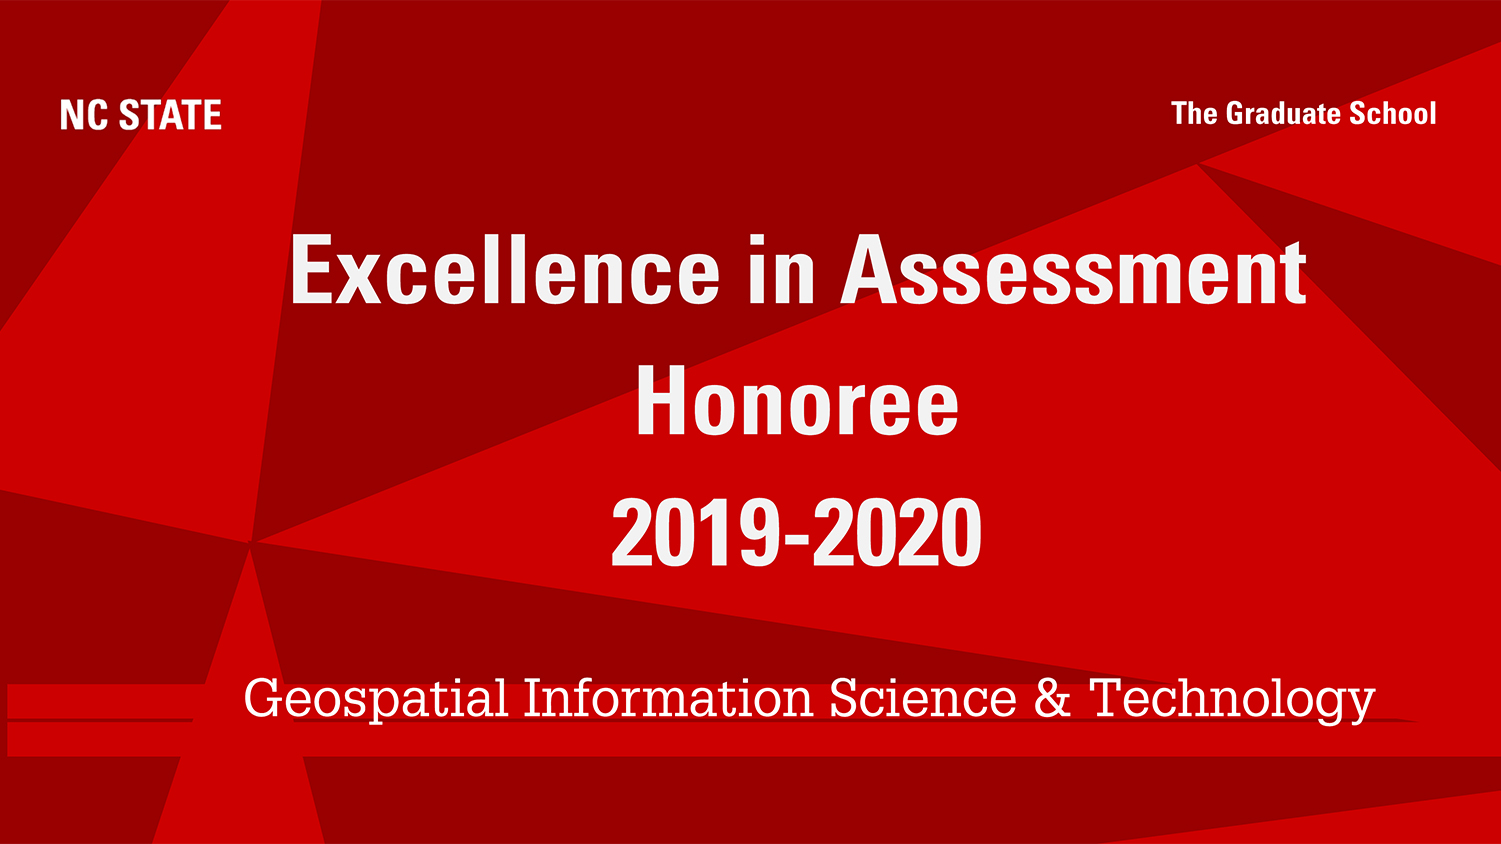 Excellence in Assessment Honoree - Master's Degree Recognized for Excellence in Program Assessment - Center for Geospatial Analytics at NC State University